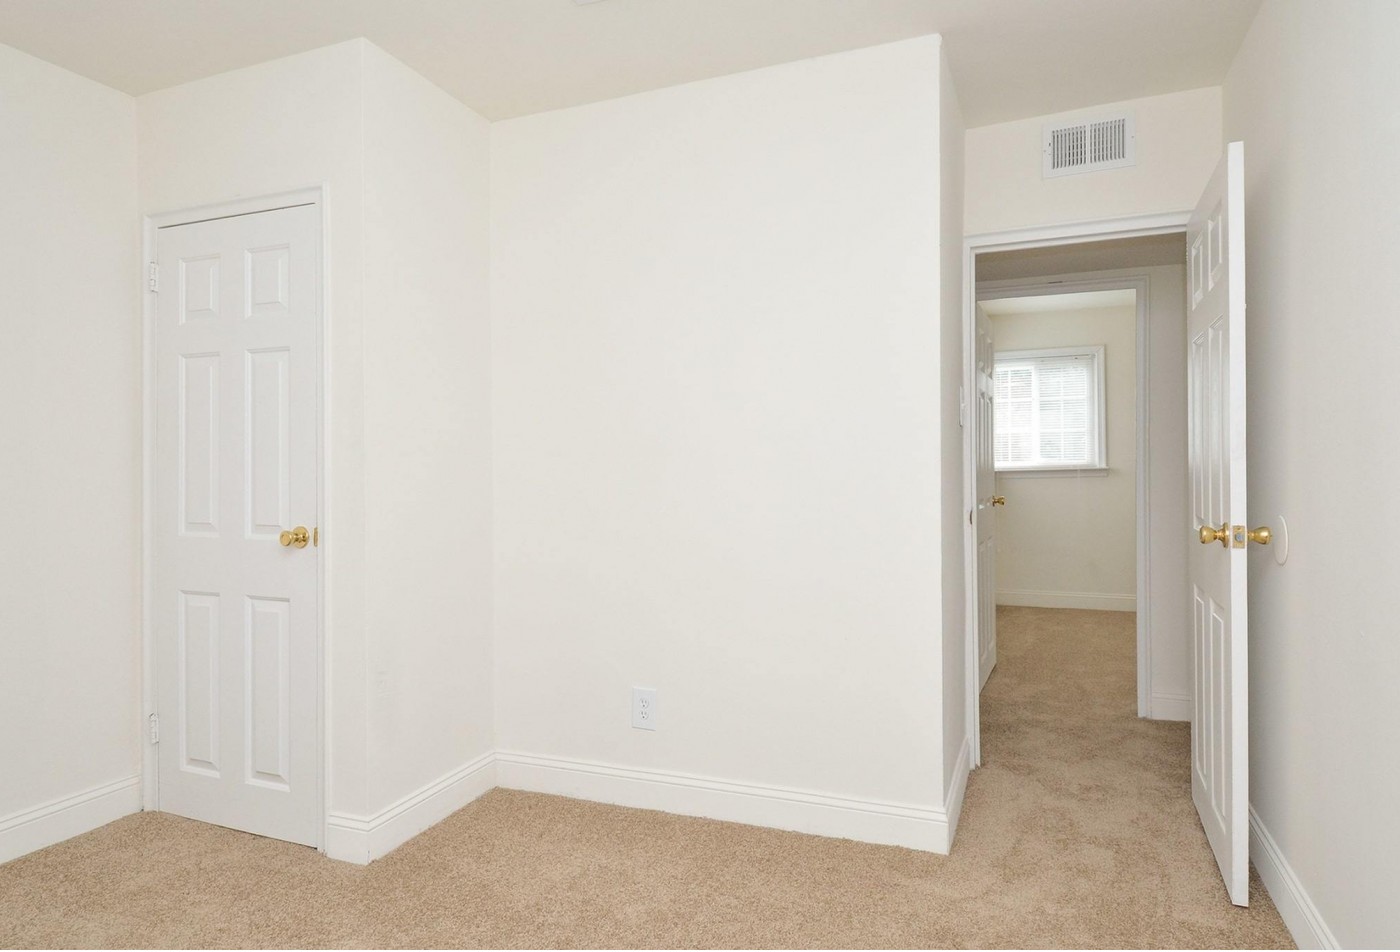 Spacious Living Room | Apartments in Wilmington, DE | Greenville on 141 Apartments & Townhomes